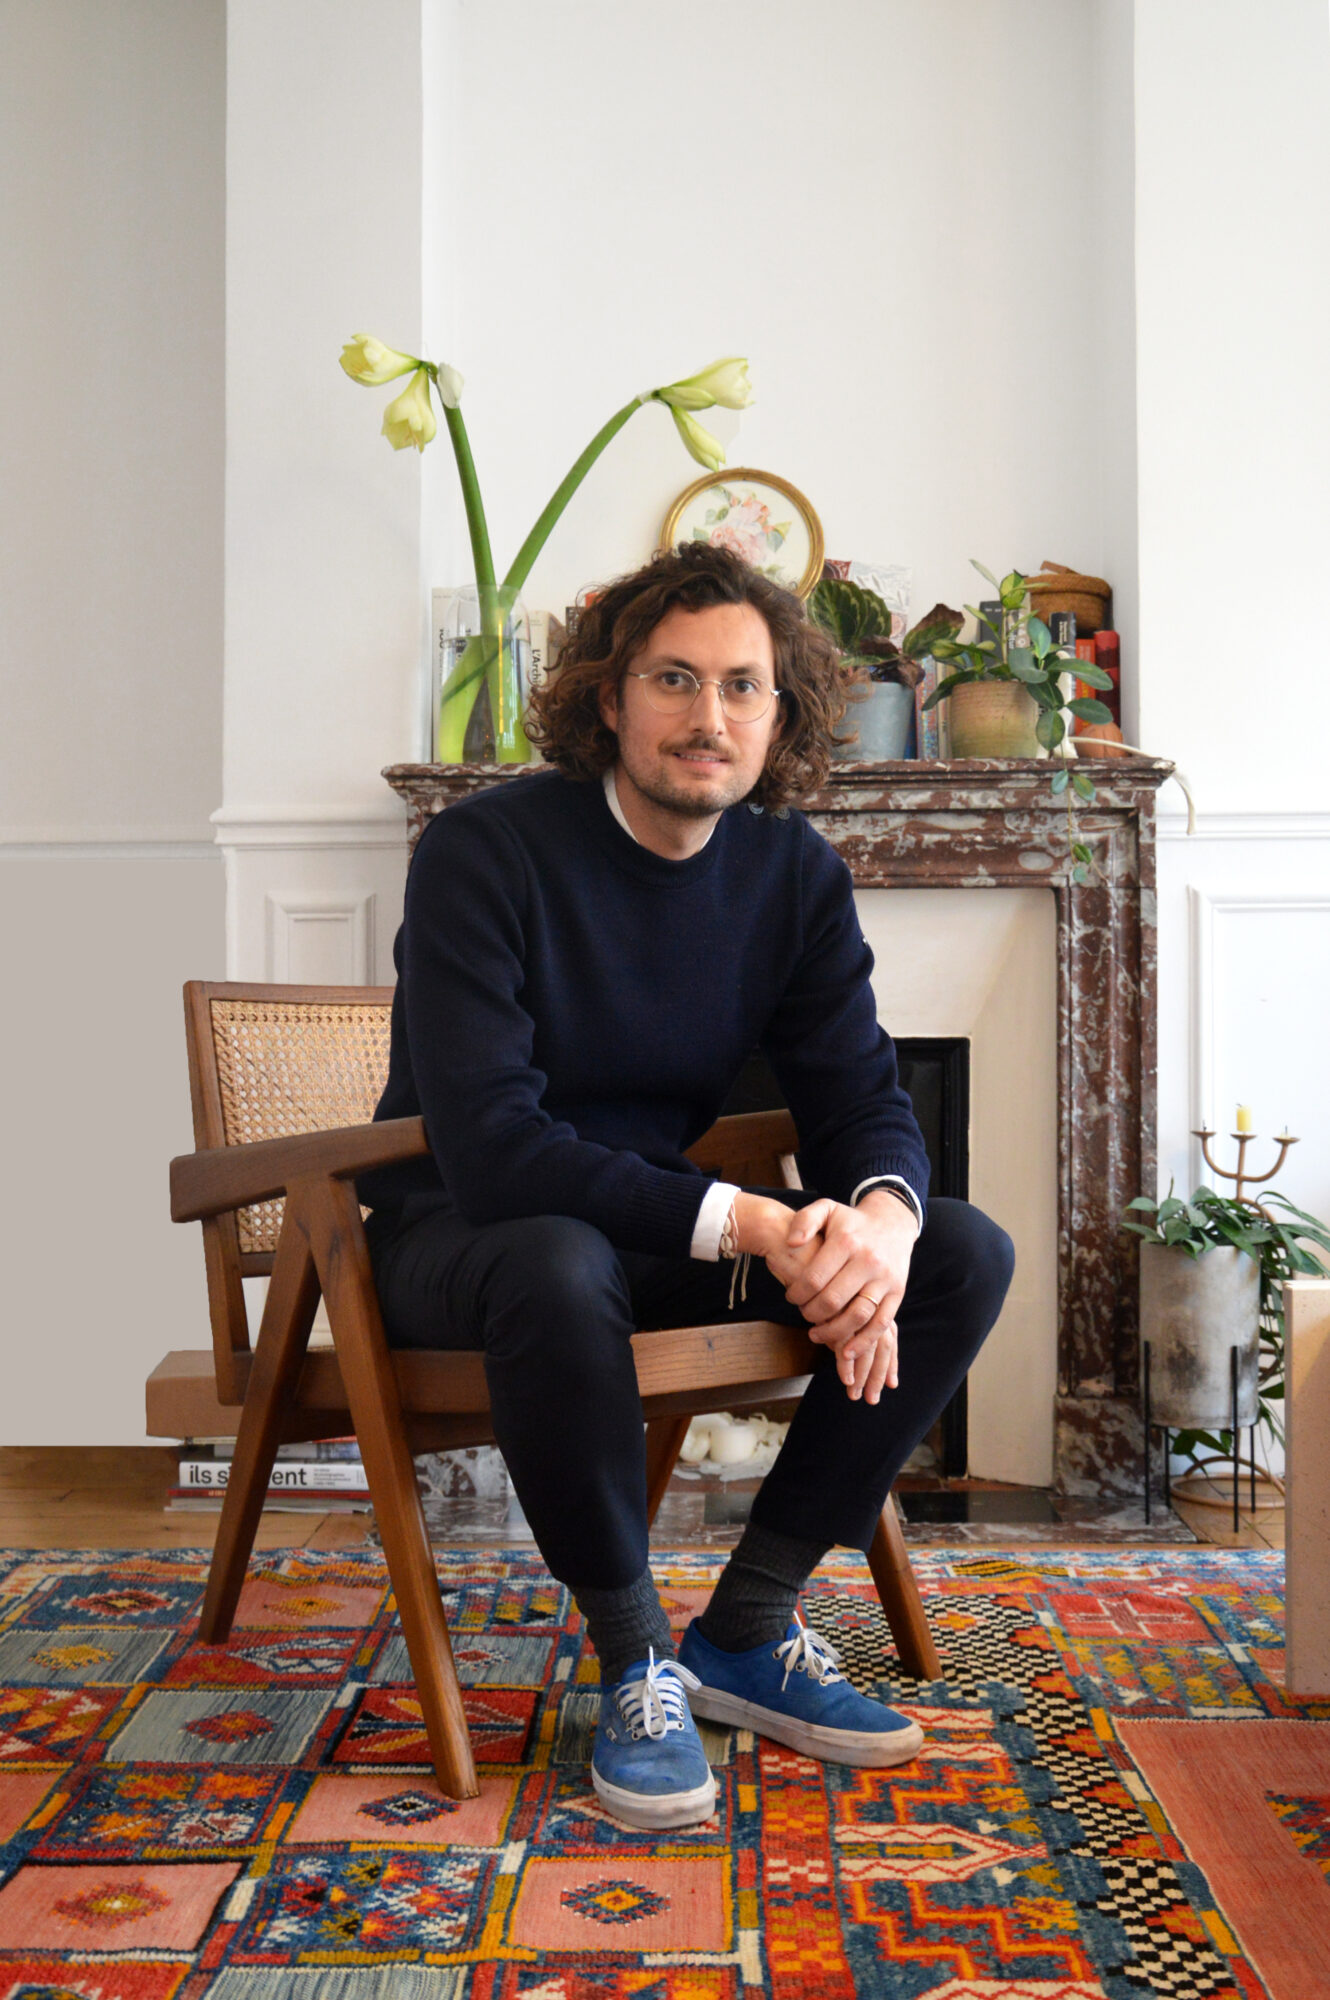 Le Collectionist co-founder Max Aniort